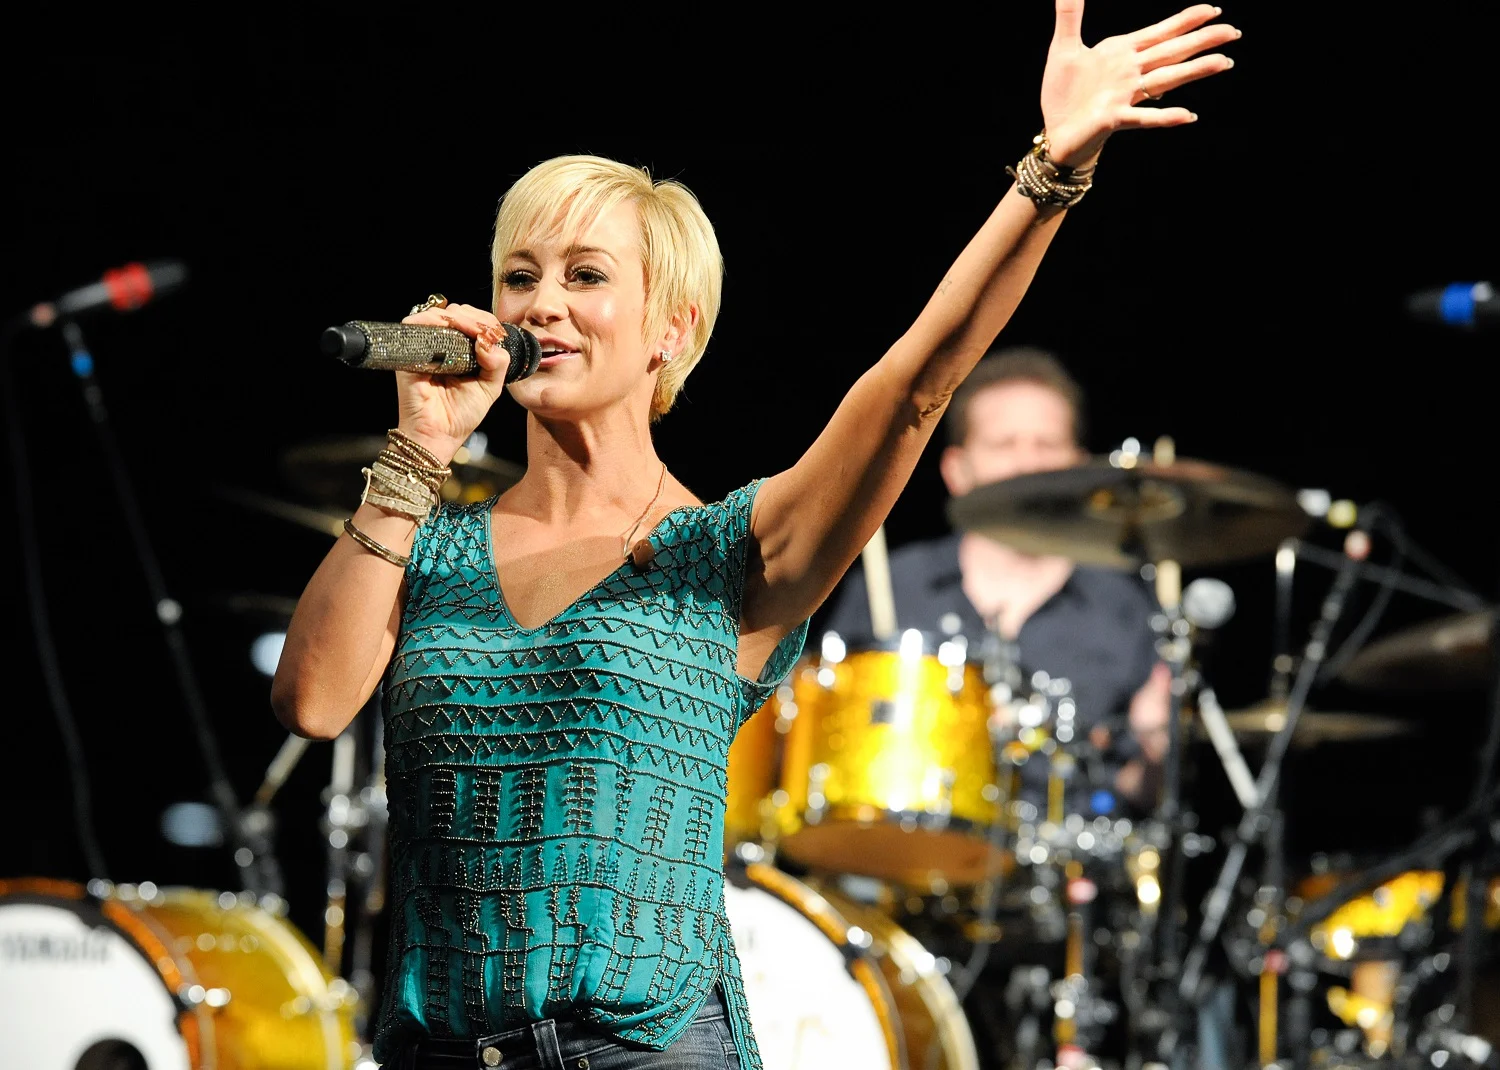 Biography, Age, Height, Education, and Net Worth of Kellie Pickler